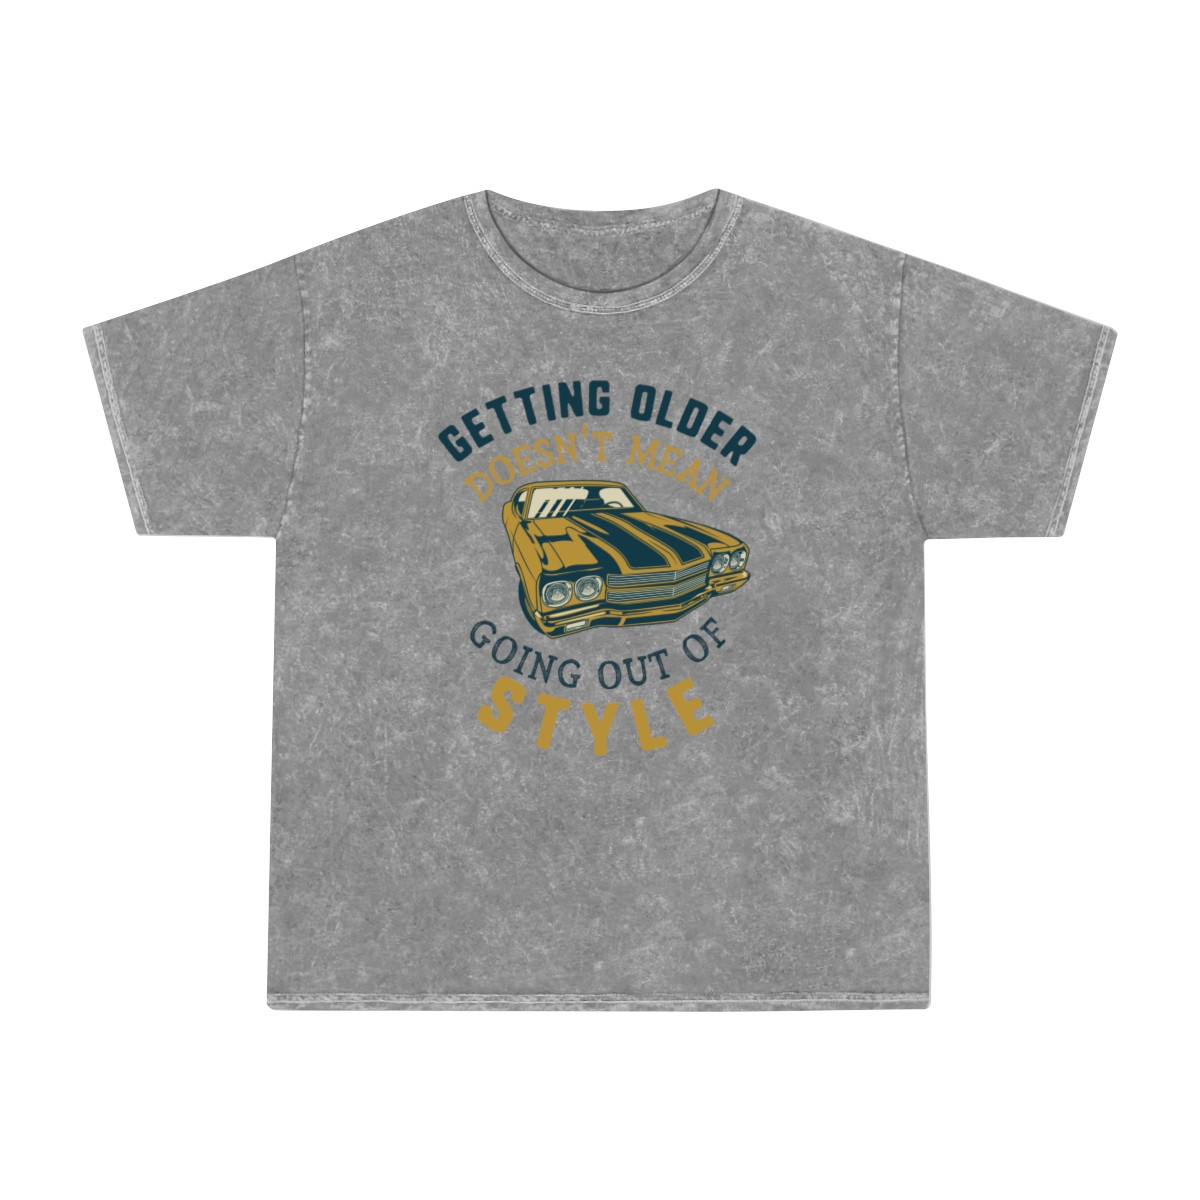 Getting Older Doesn't Mean Going Out Of Style Unisex Mineral Wash T-Shirt